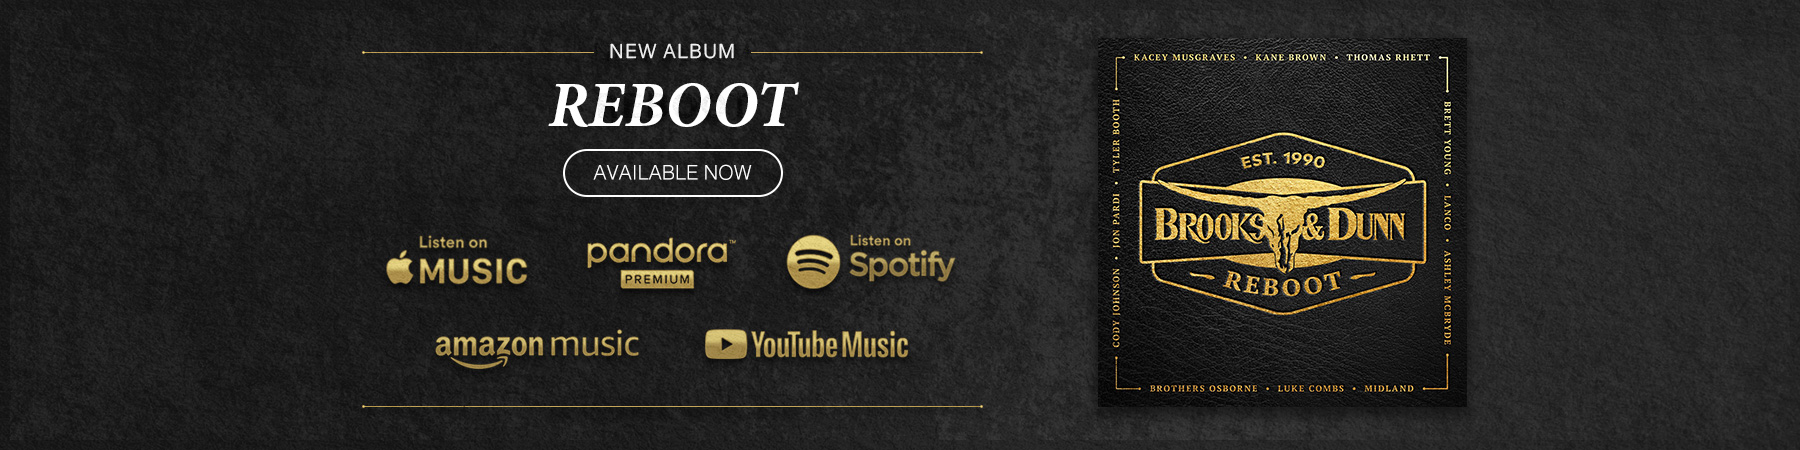 Reboot - Available Now At Your Favorite Retailers